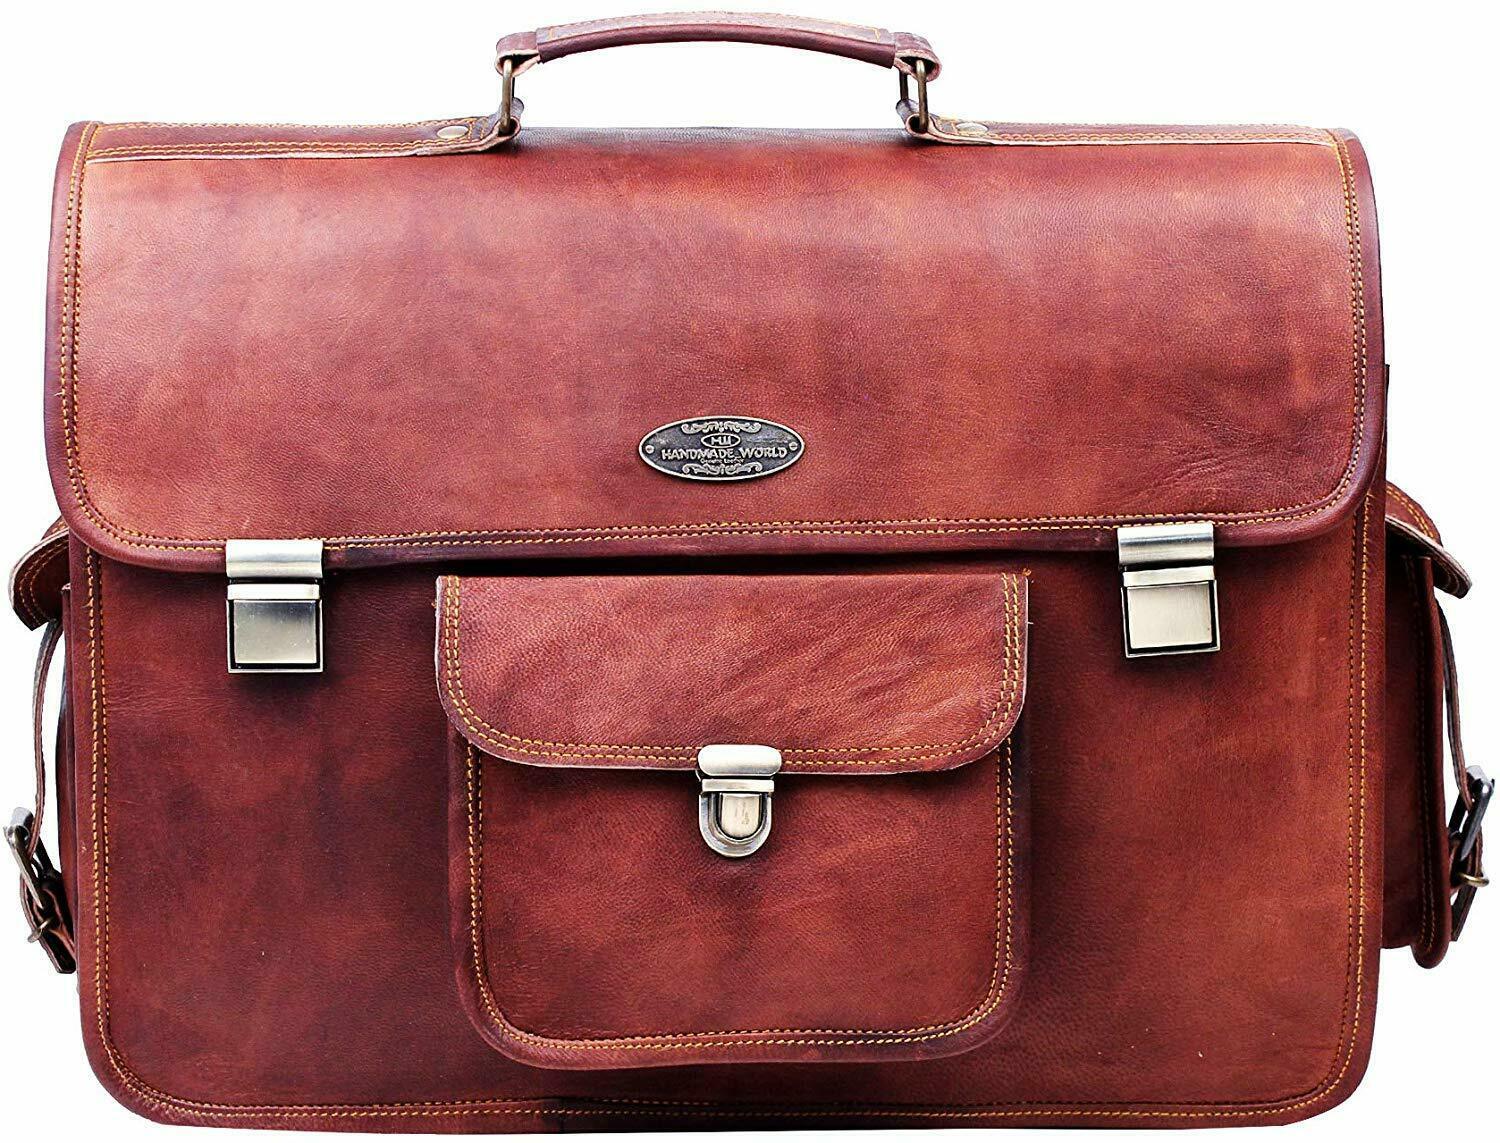 Large Leather Messenger Bag for Men 18 inches with Rustic Look Leather Briefcase - Bags